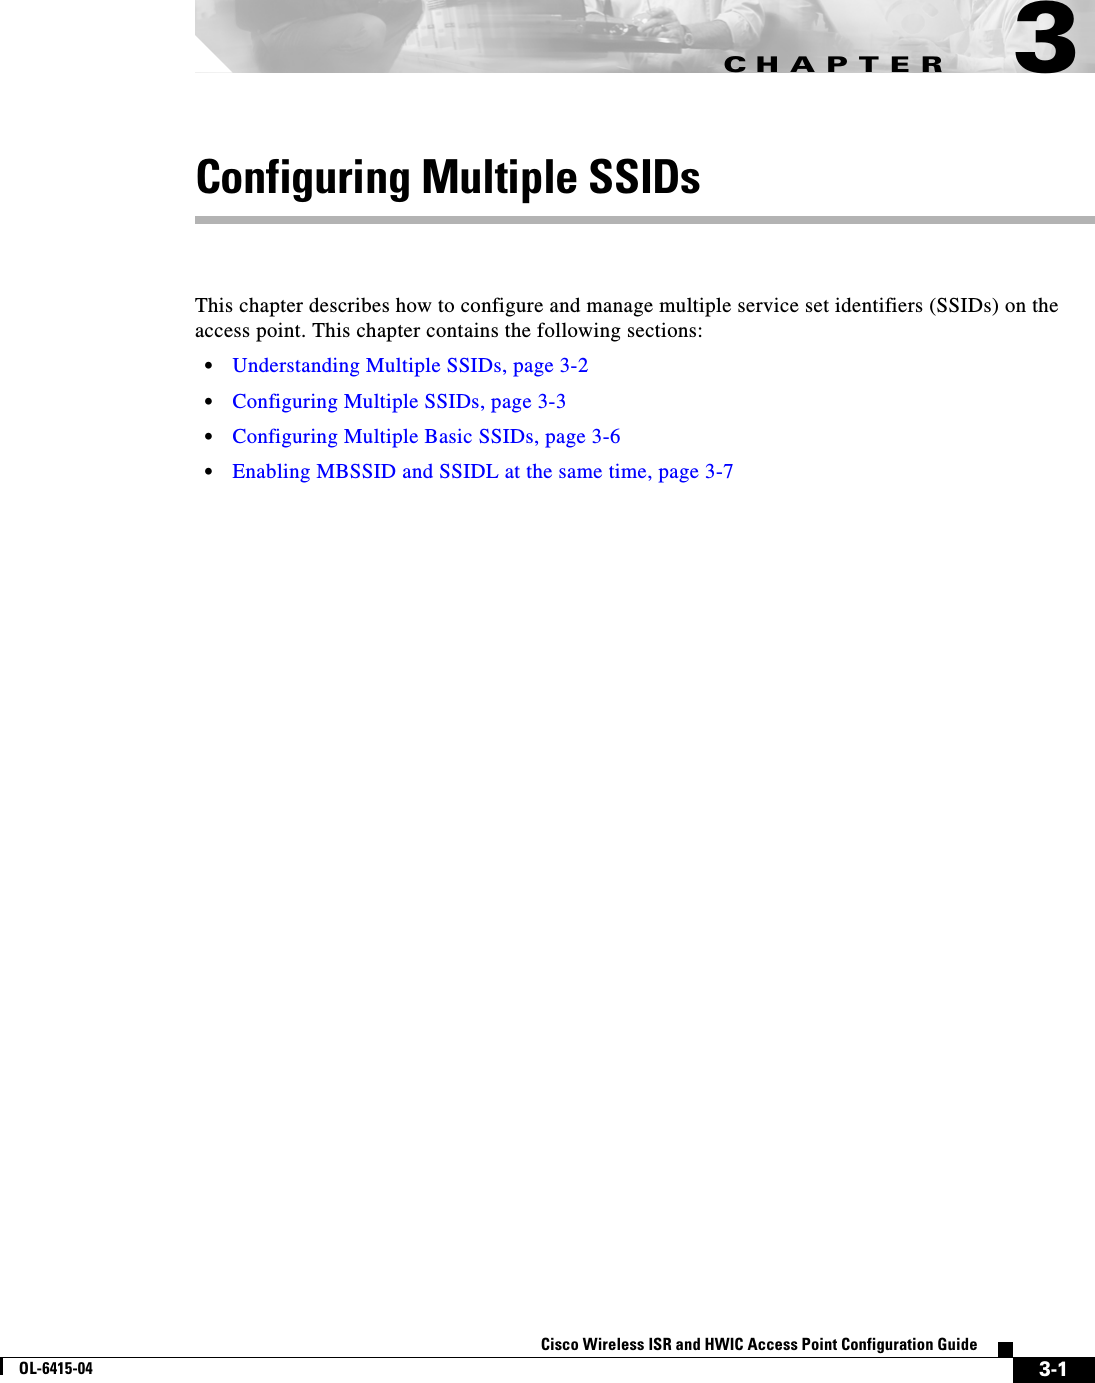 CHAPTER3-1Cisco Wireless ISR and HWIC Access Point Configuration GuideOL-6415-043Configuring Multiple SSIDsThis chapter describes how to configure and manage multiple service set identifiers (SSIDs) on the access point. This chapter contains the following sections:  • Understanding Multiple SSIDs, page 3-2  • Configuring Multiple SSIDs, page 3-3  • Configuring Multiple Basic SSIDs, page 3-6  • Enabling MBSSID and SSIDL at the same time, page 3-7